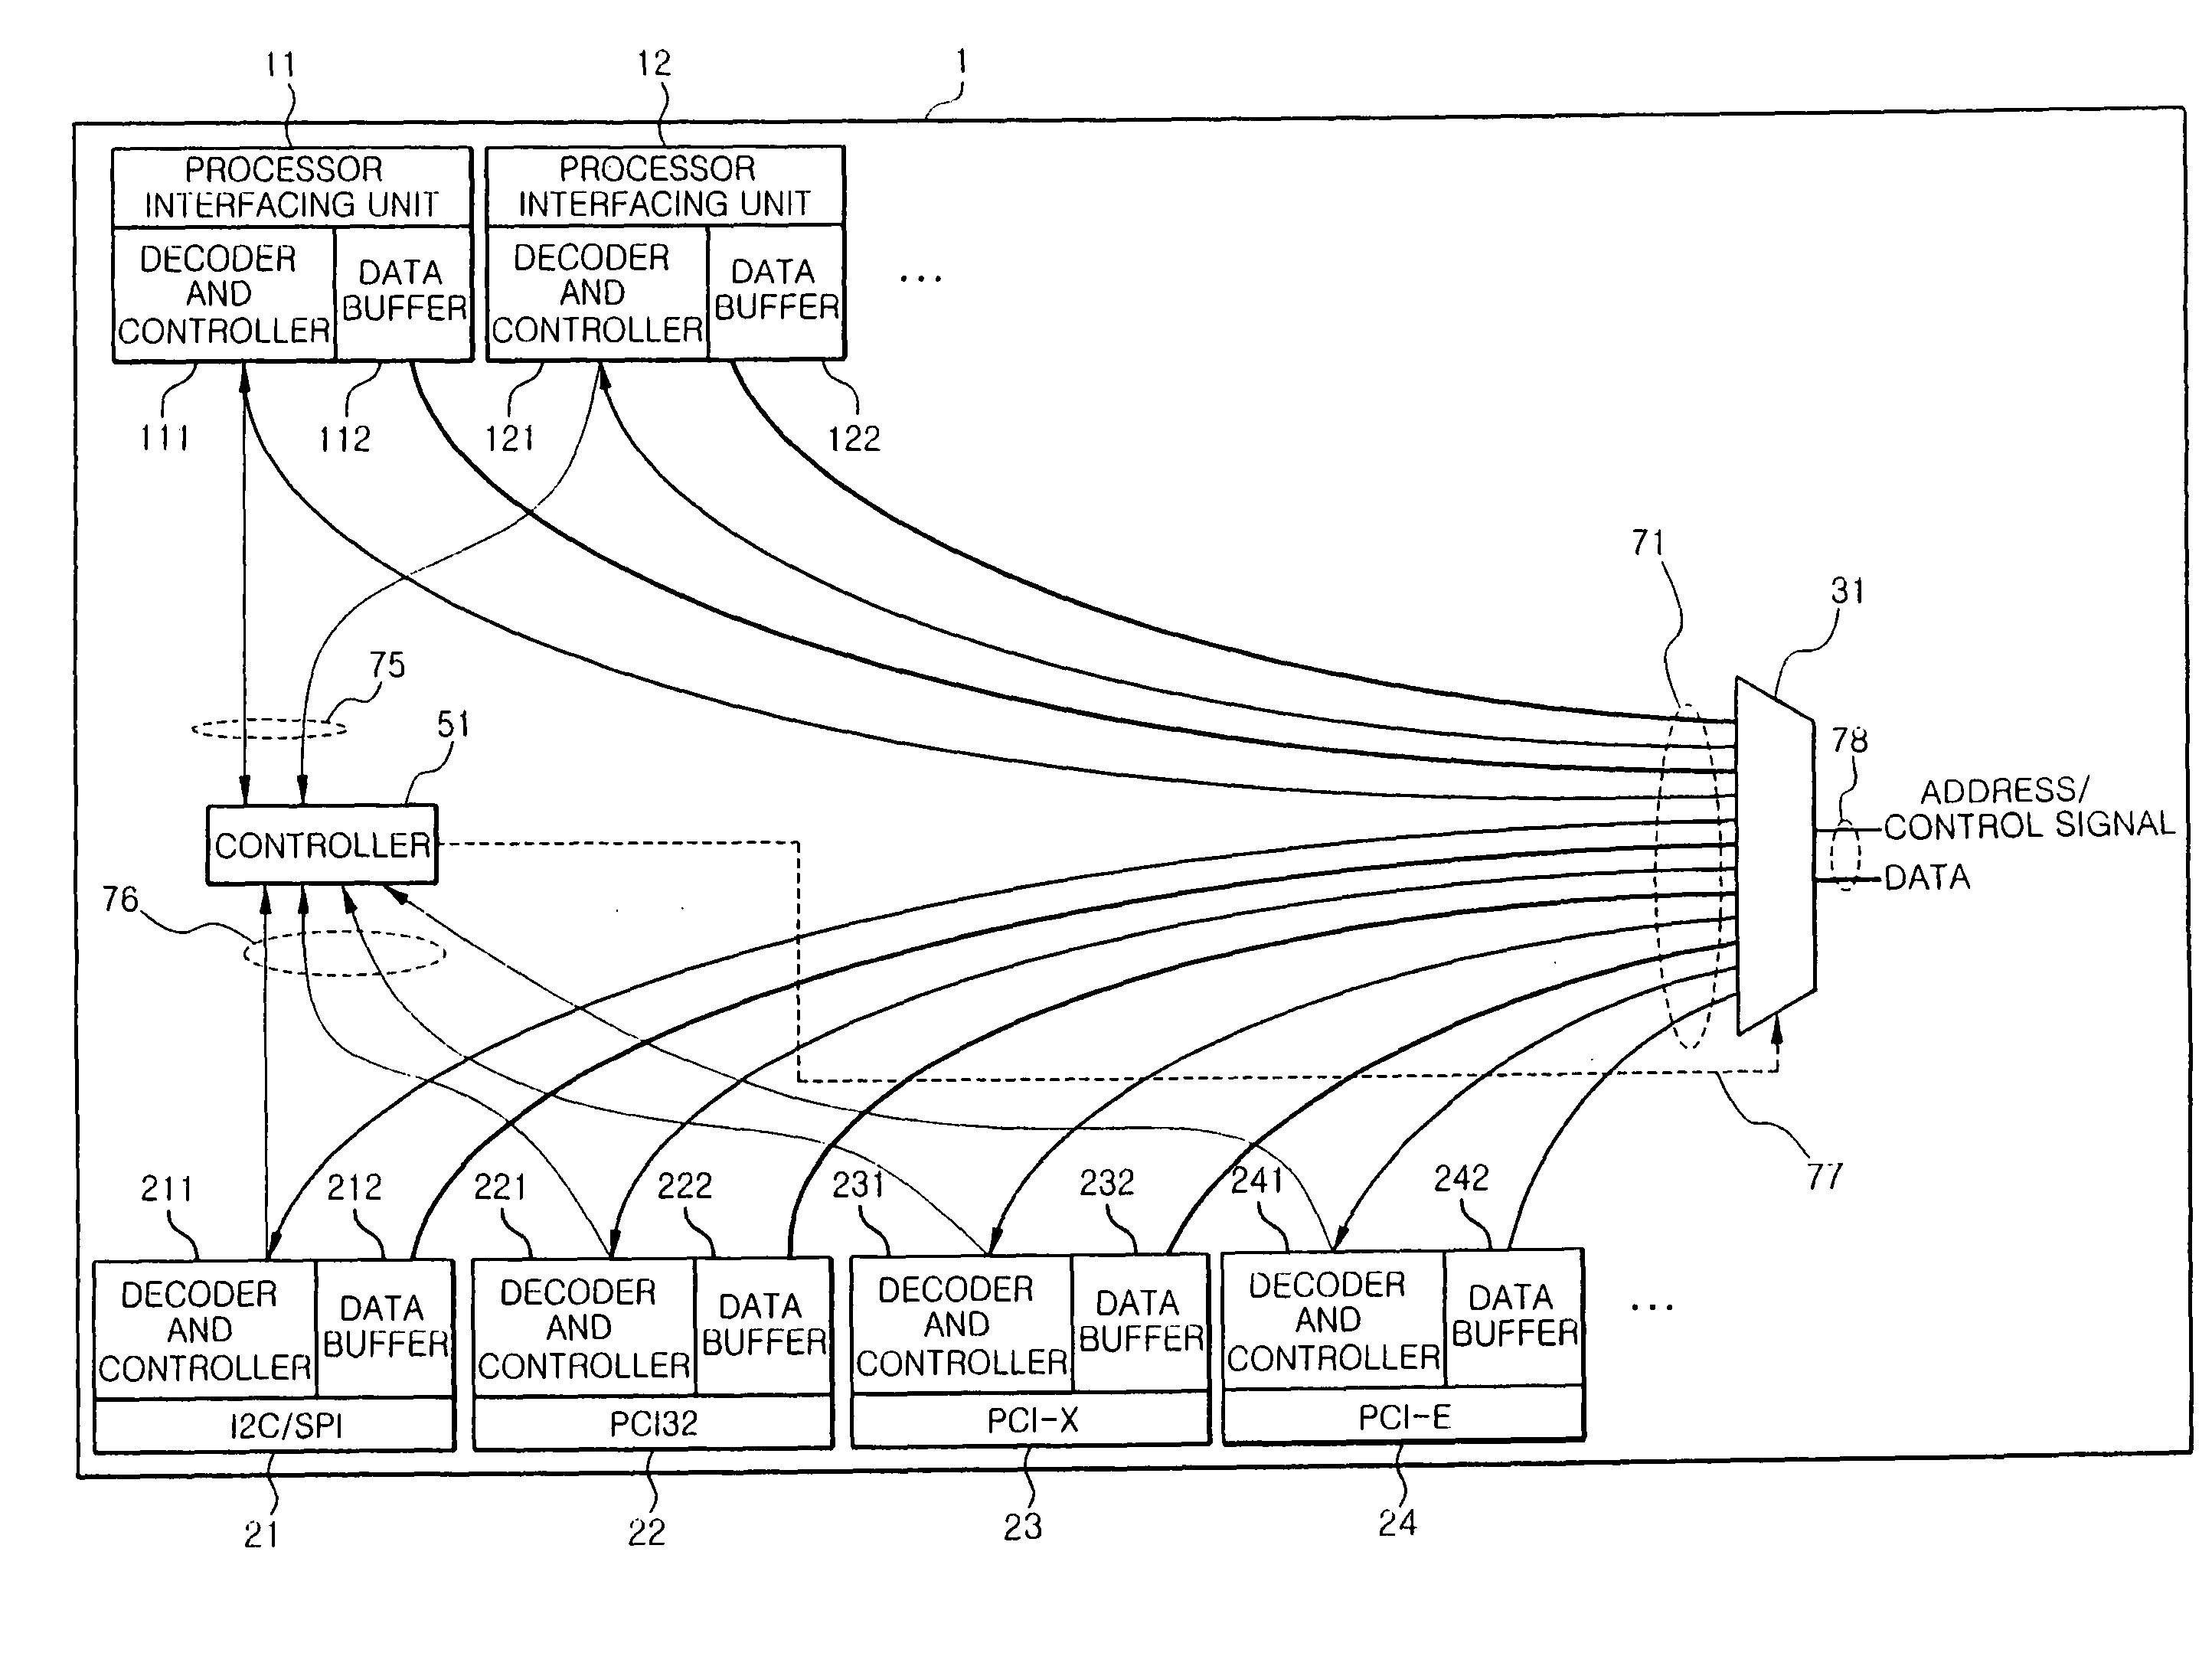 Memory switching control apparatus using open serial interface, operating method thereof, and data storage device therefor